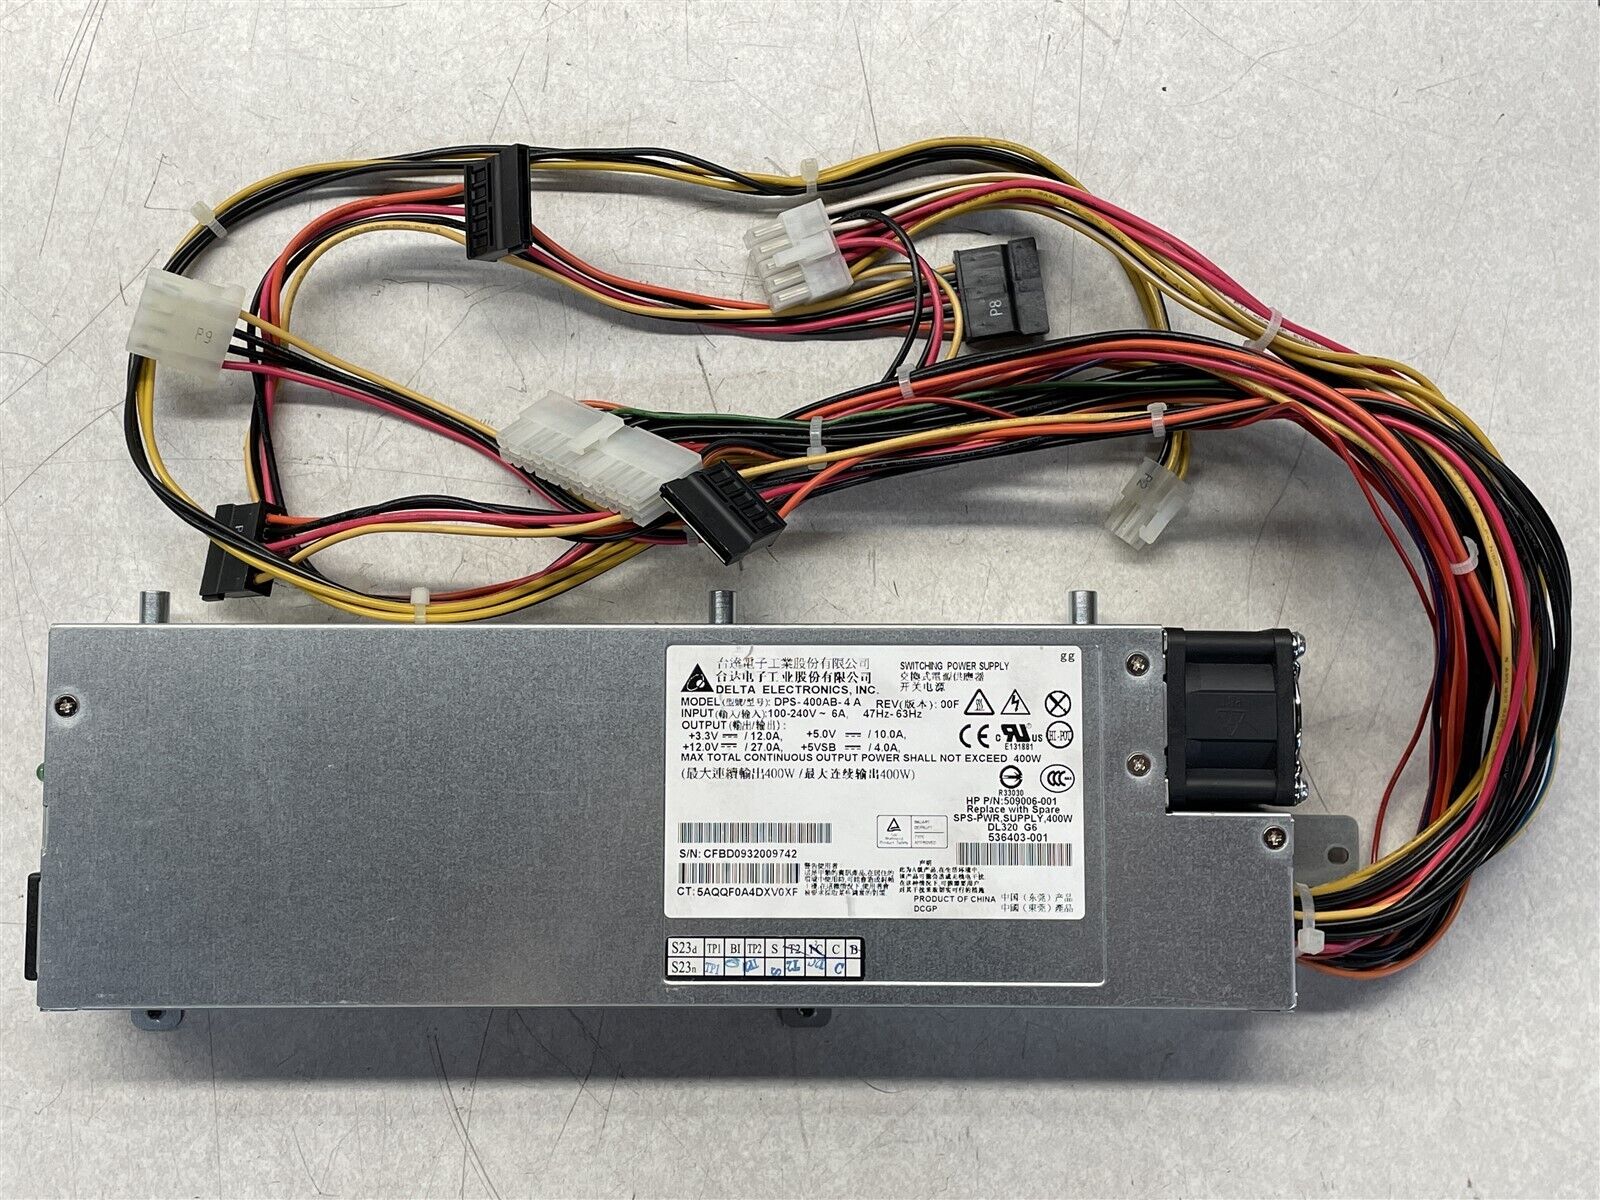 DELTA ELECTRONICS DPS-400AB 400W SWITCHING POWER SUPPLY CFBD0932009742